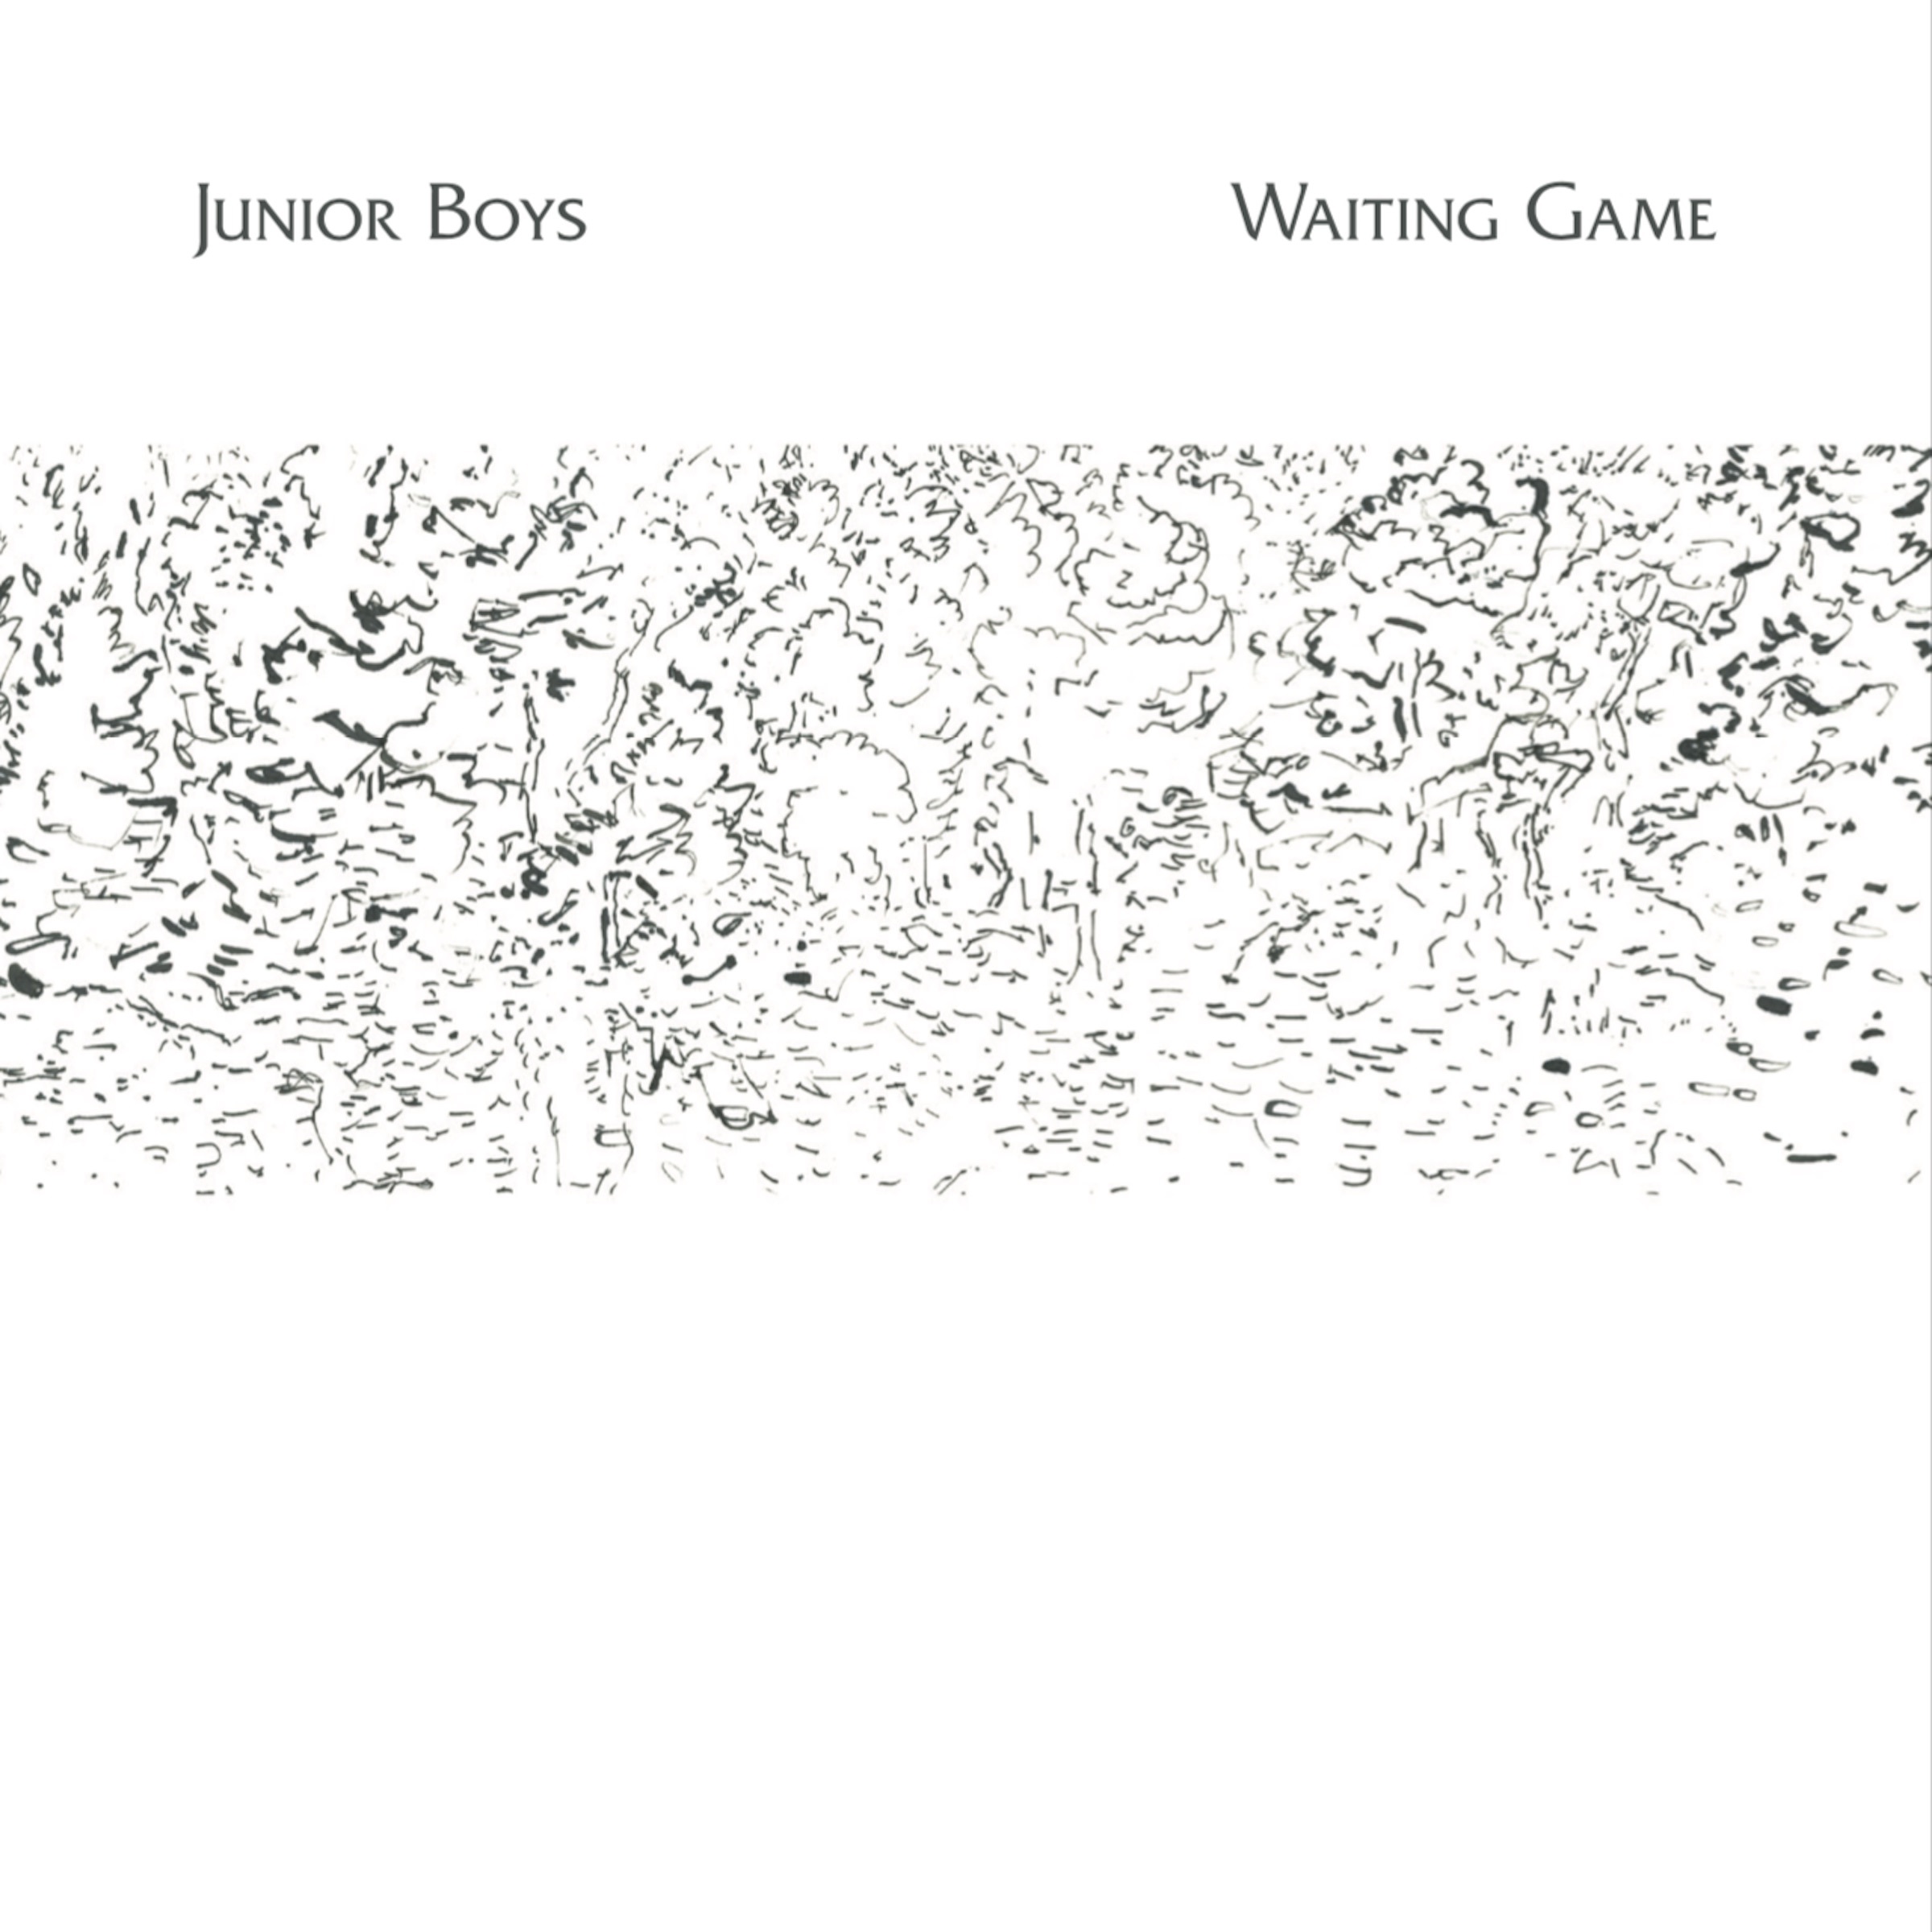 The Junior Boys beautiful new album “Waiting Game” is out today.